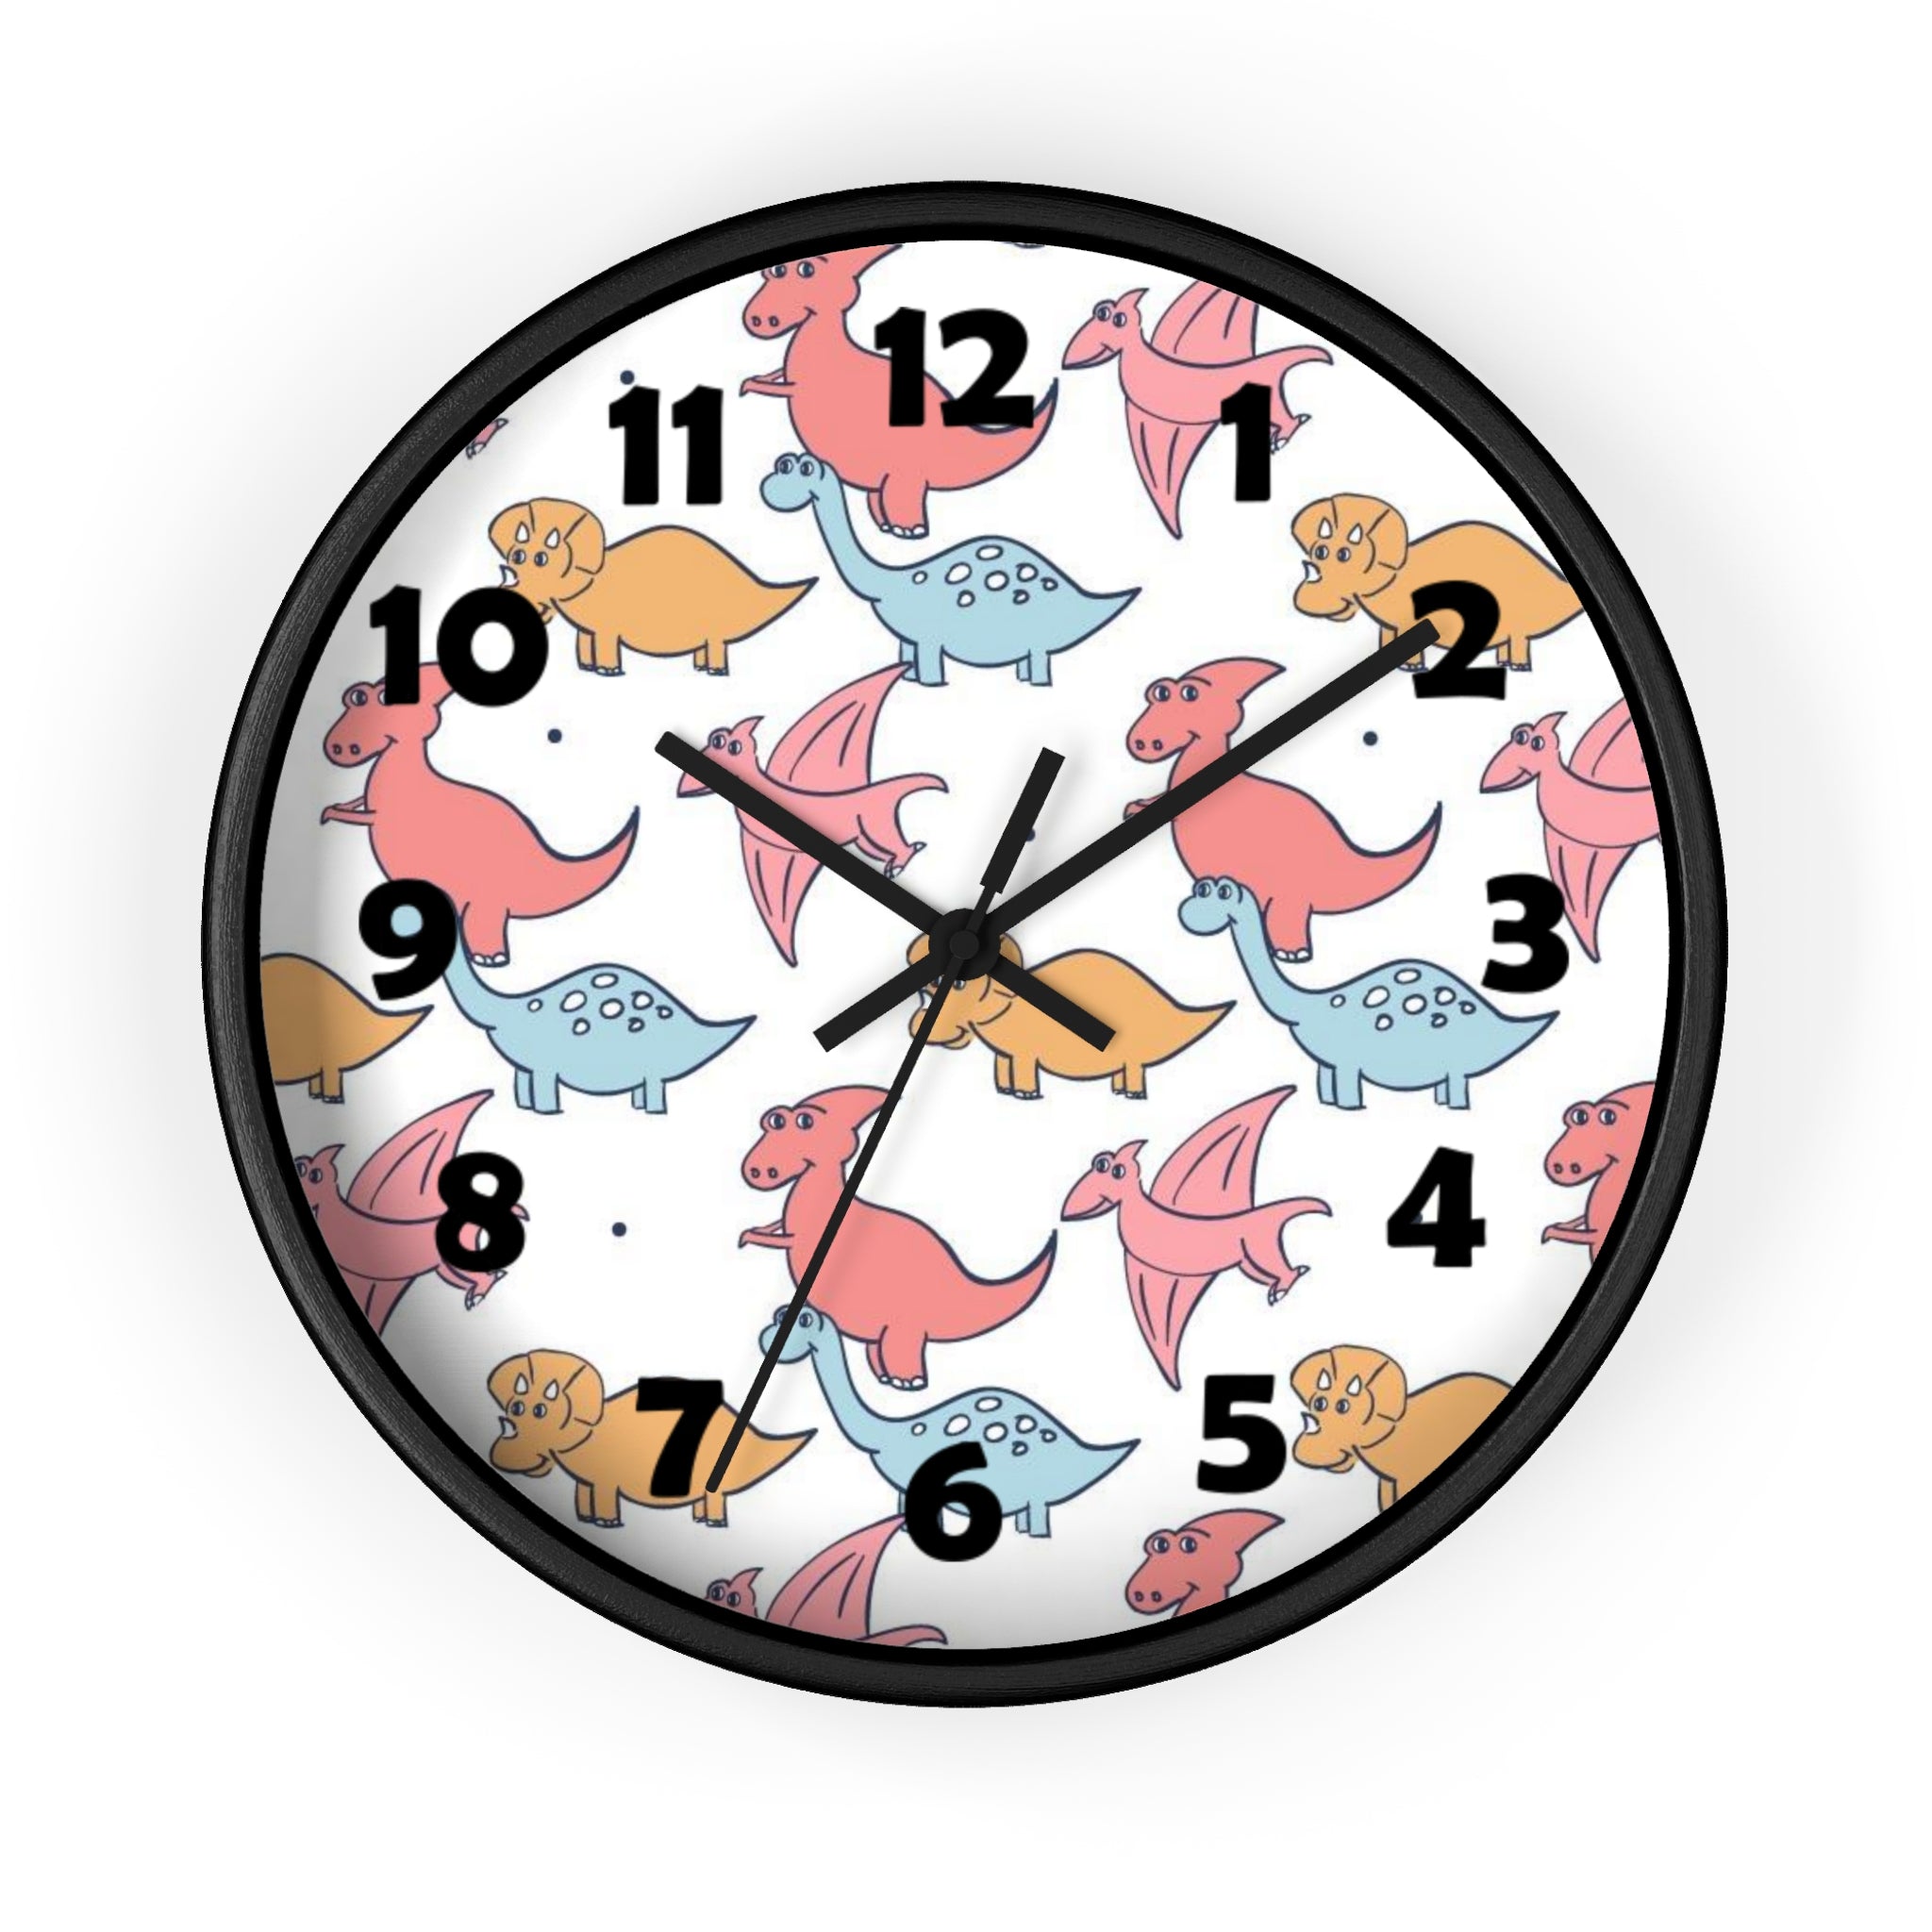 10 inch round wall clock with colorful dinosaurs